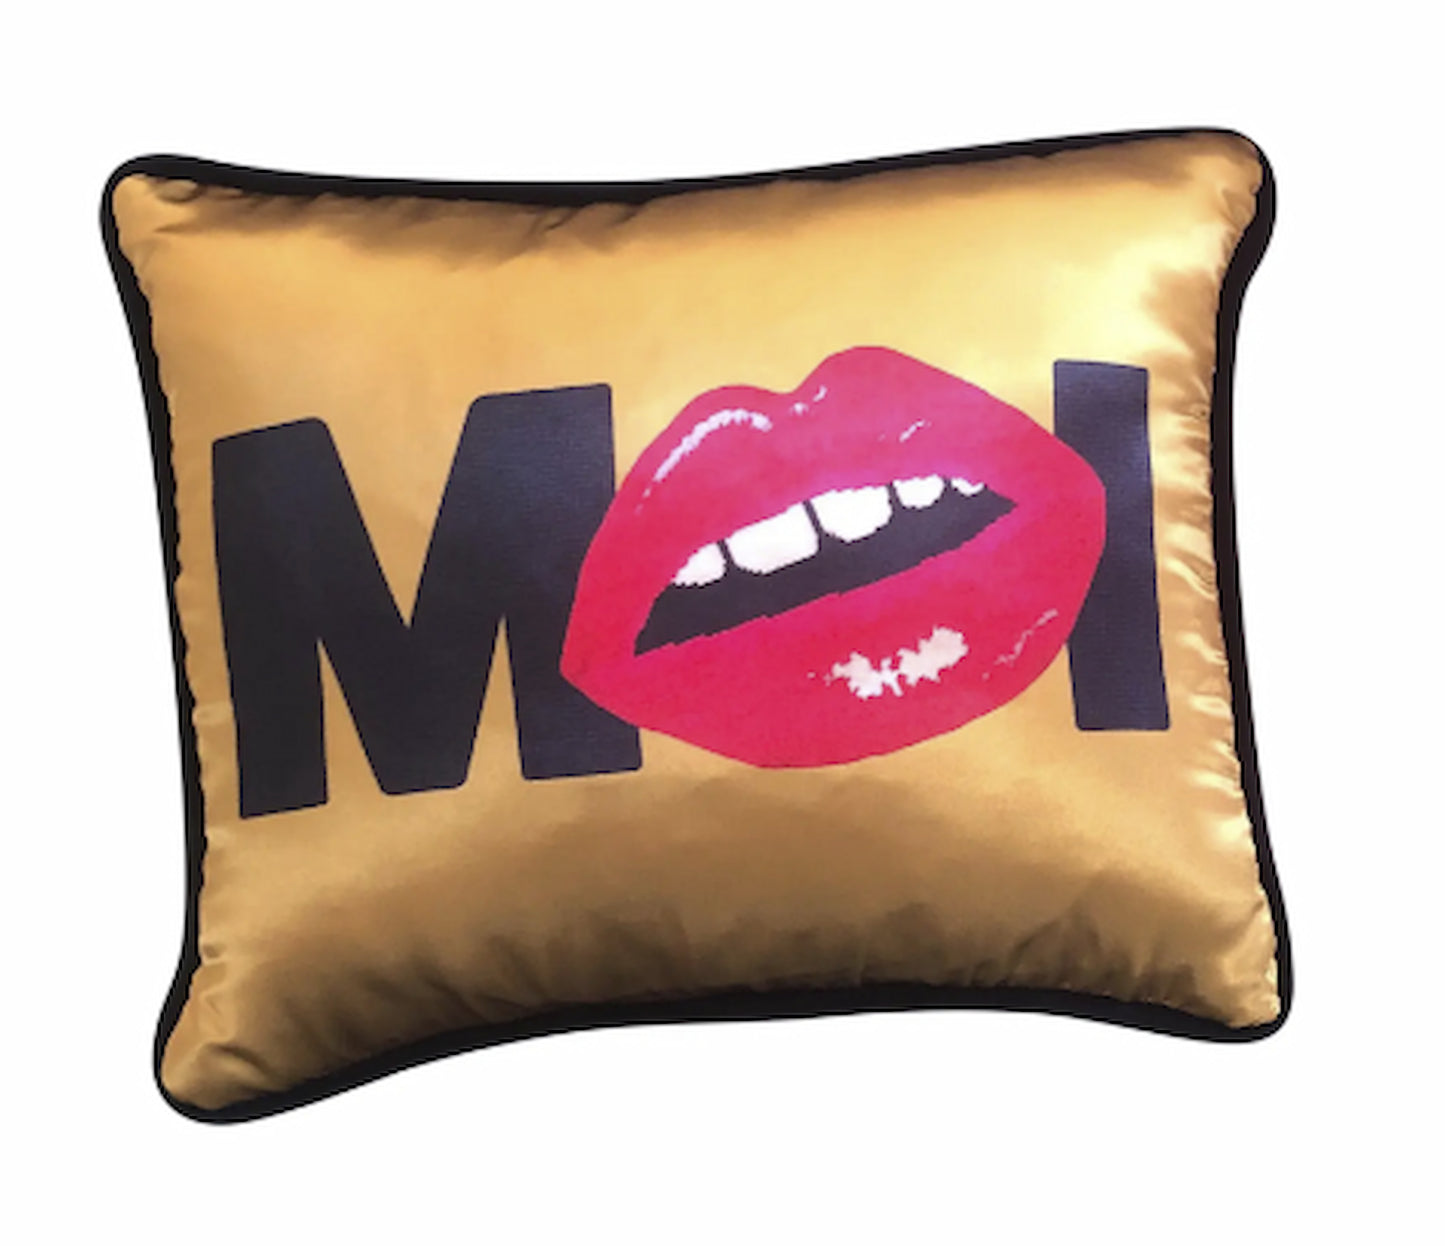 gold satin pillow with MOI written in black, red lips replacing the O